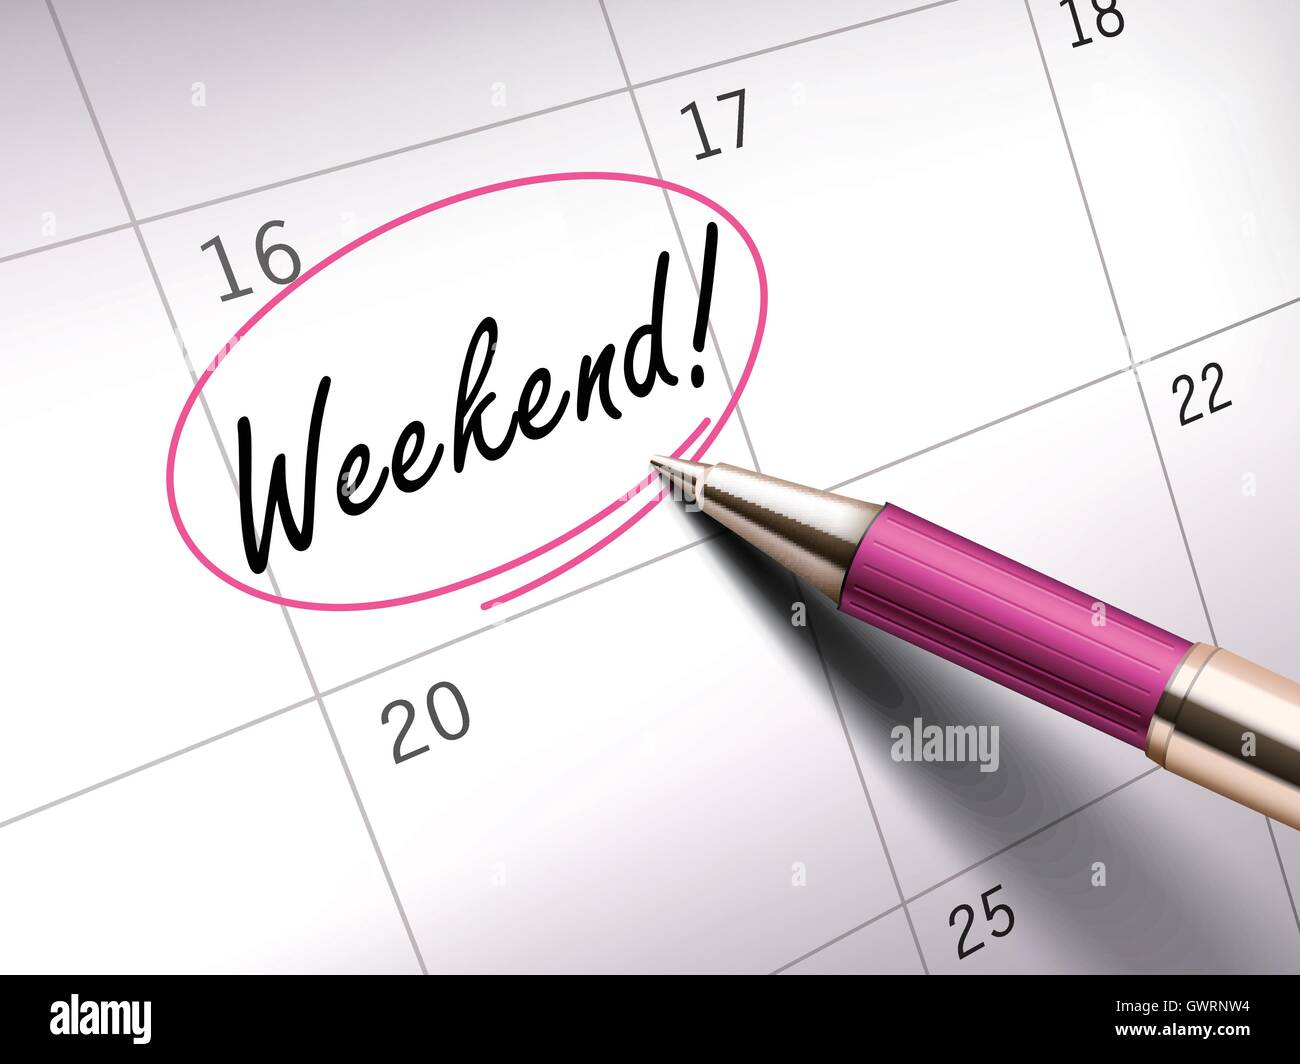 weekend-words-circle-marked-on-a-calendar-by-a-pink-ballpoint-pen-stock